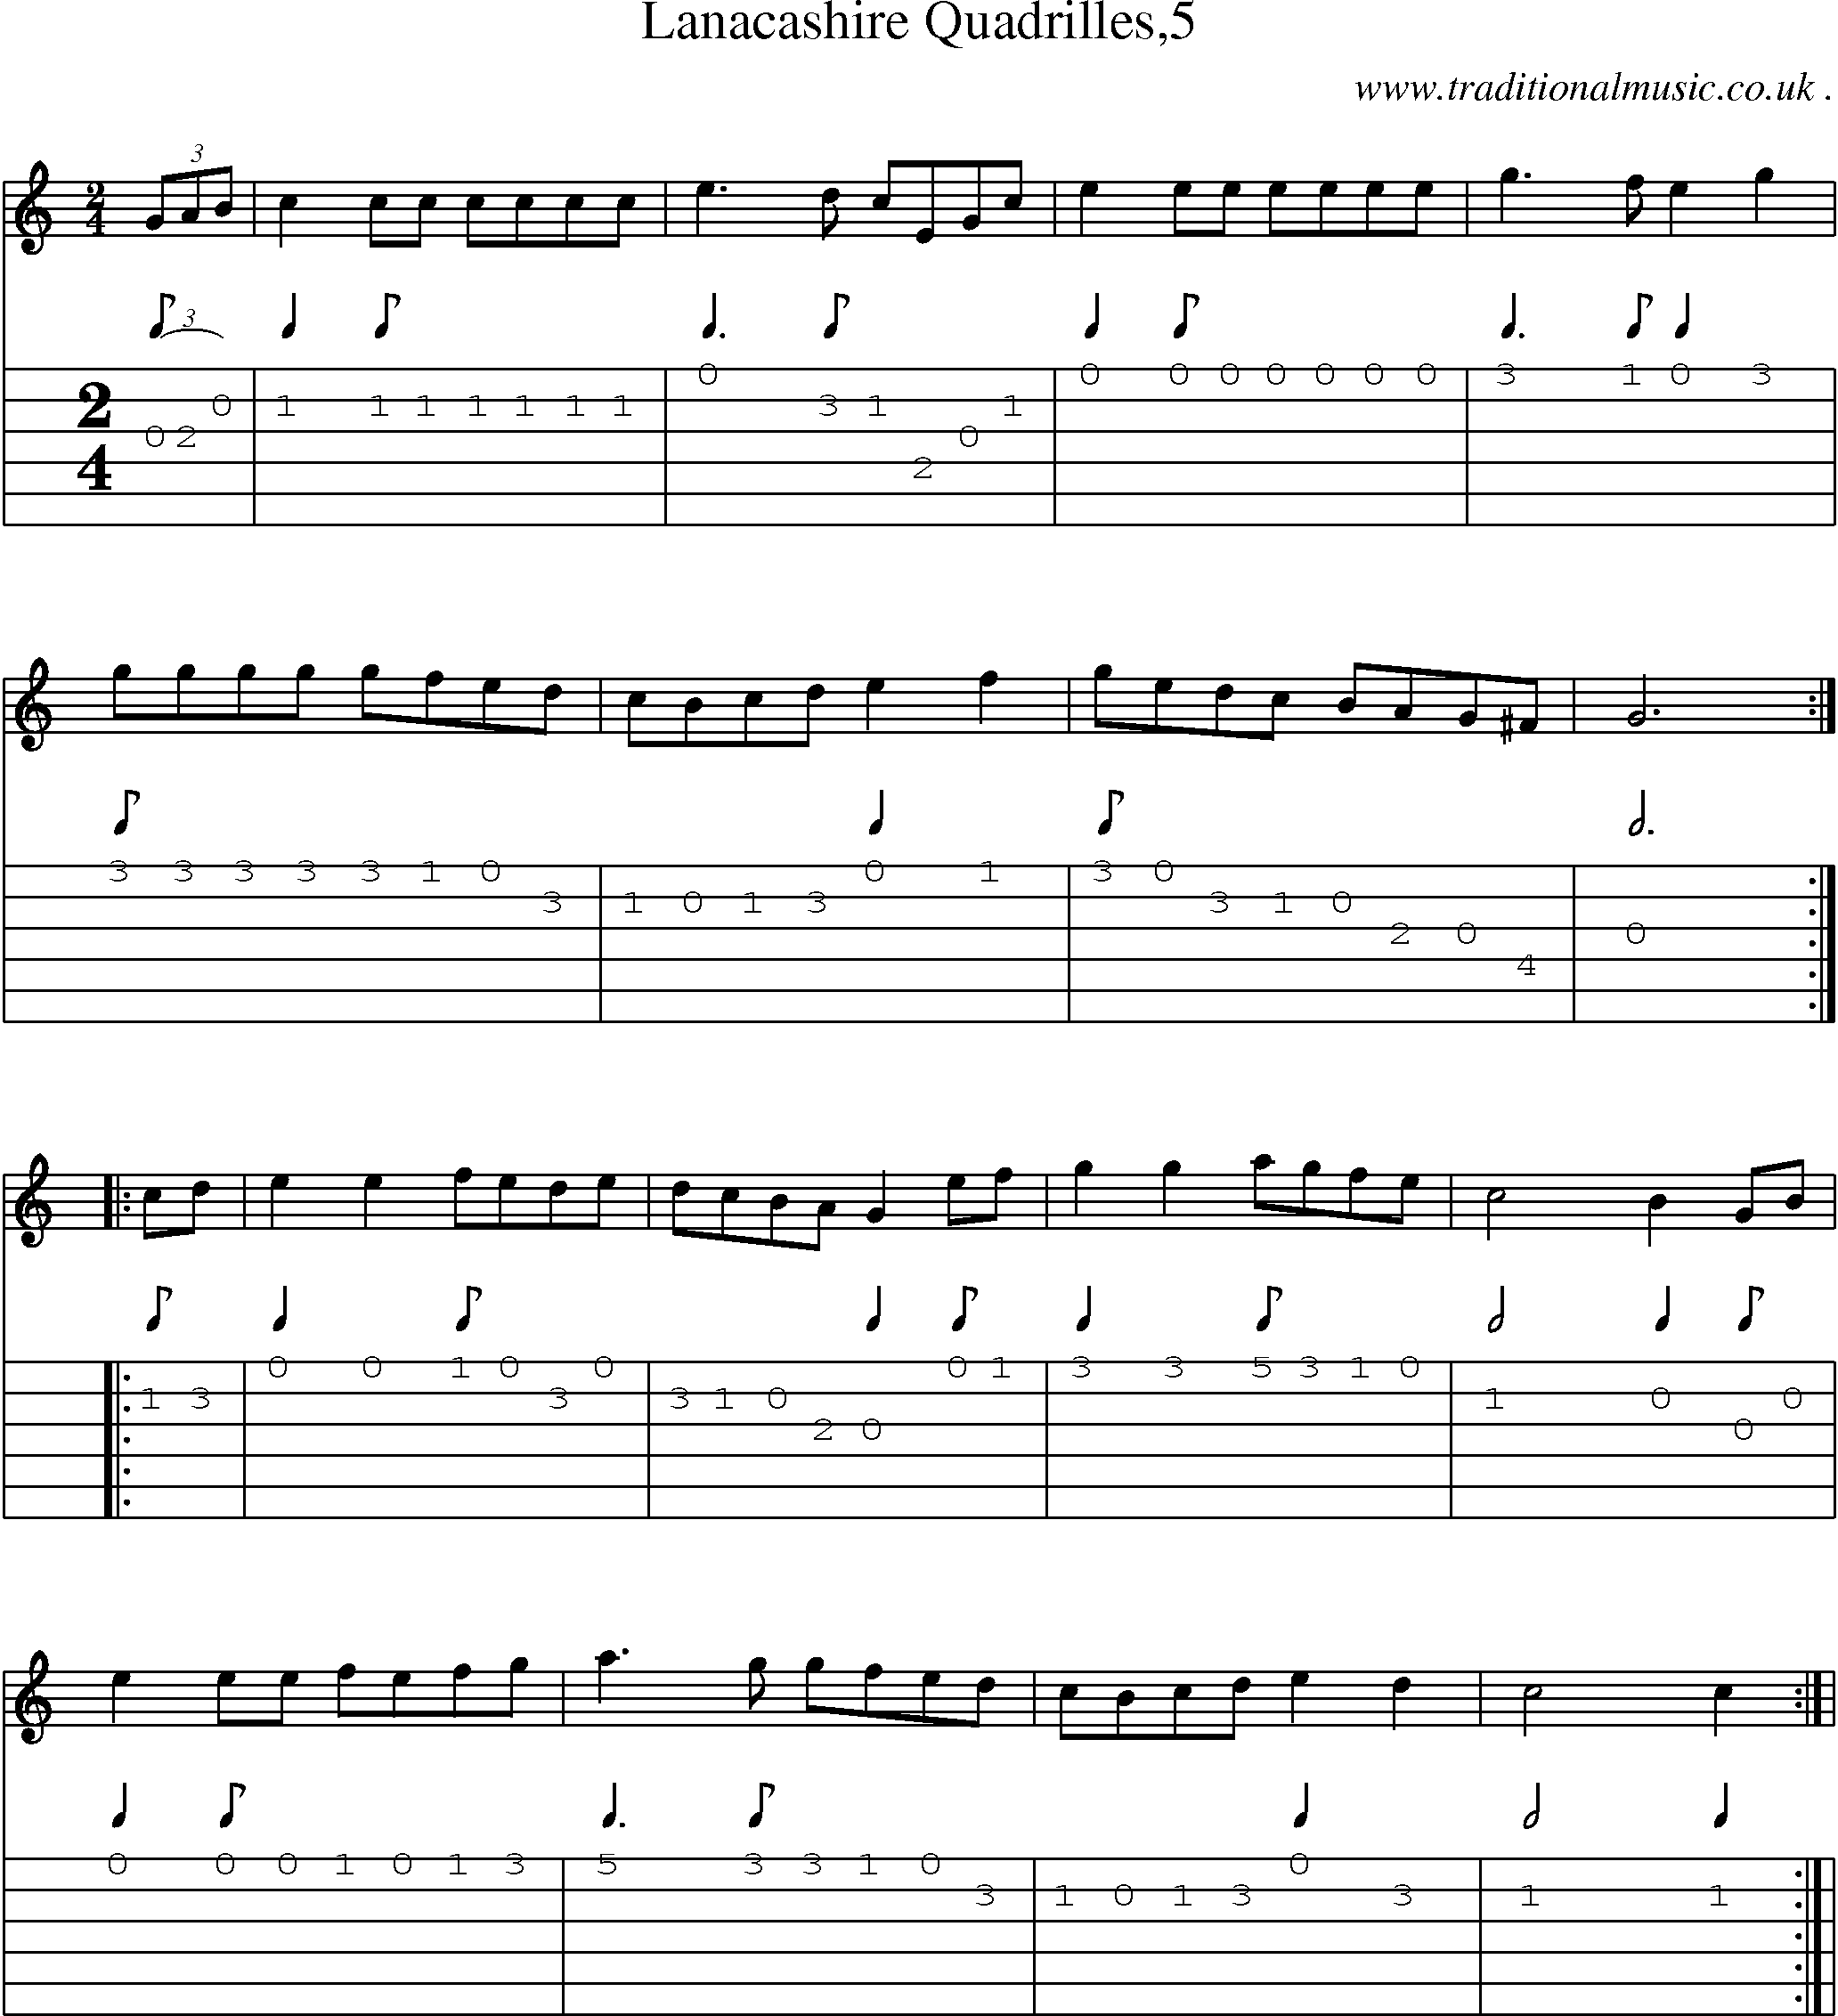 Sheet-Music and Guitar Tabs for Lanacashire Quadrilles5